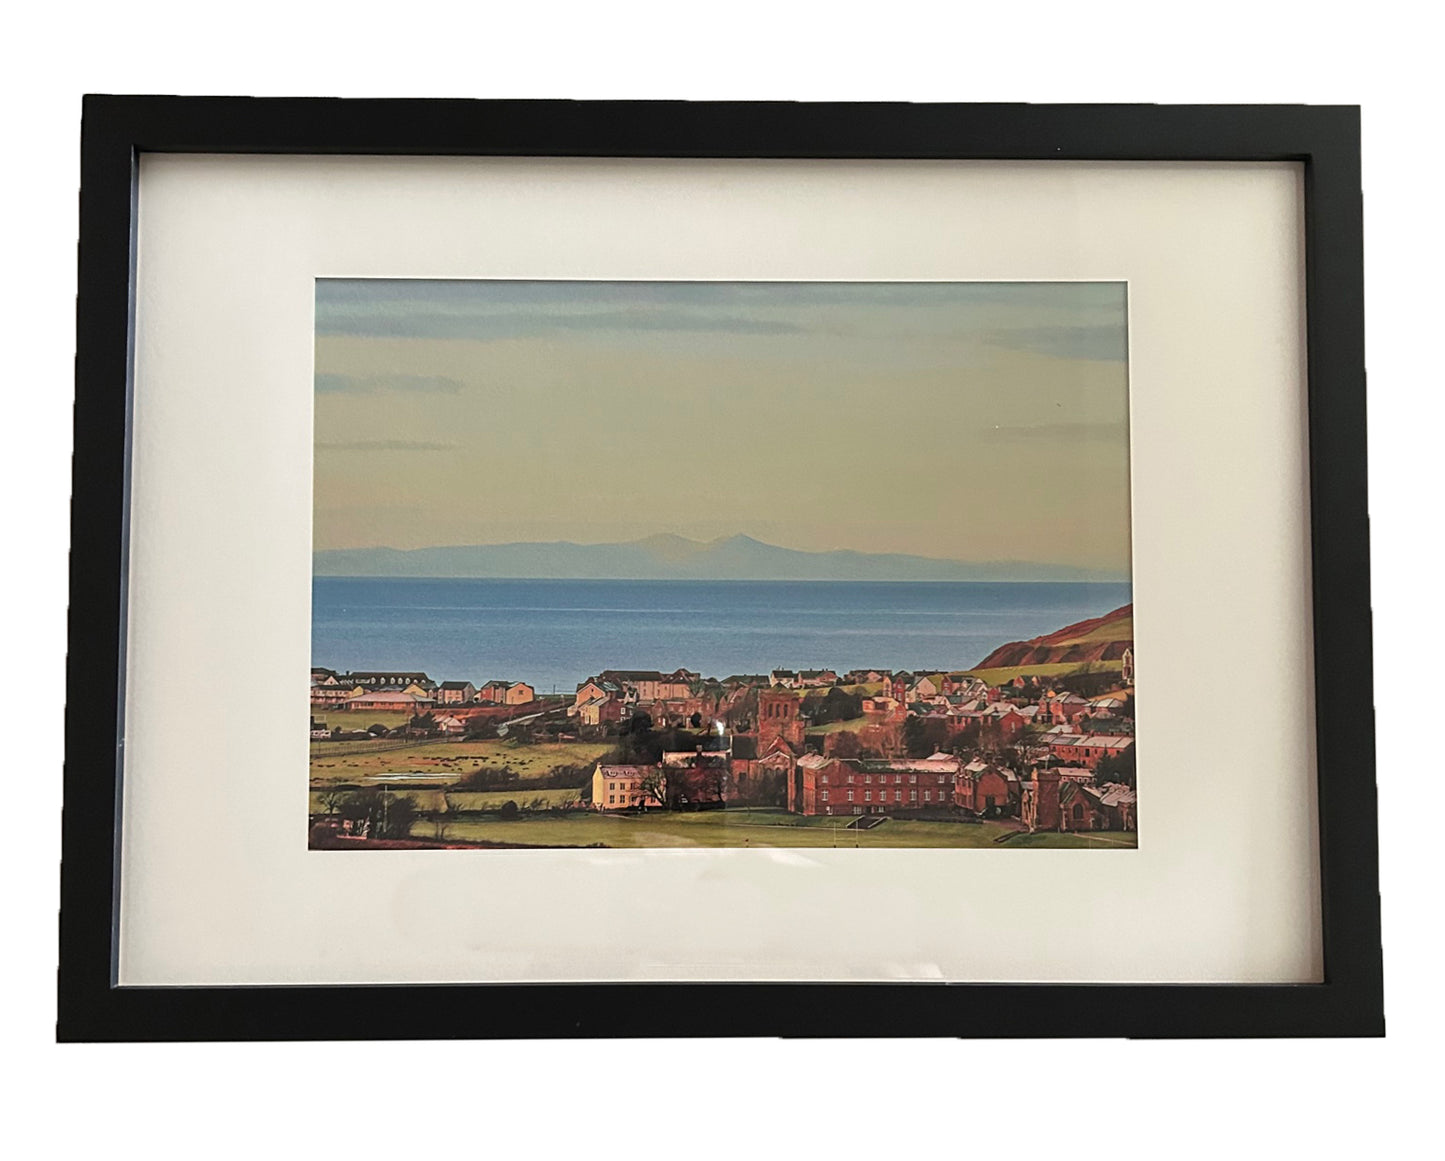 View over St Bees and Isle of Man Giclée A3 Framed Print